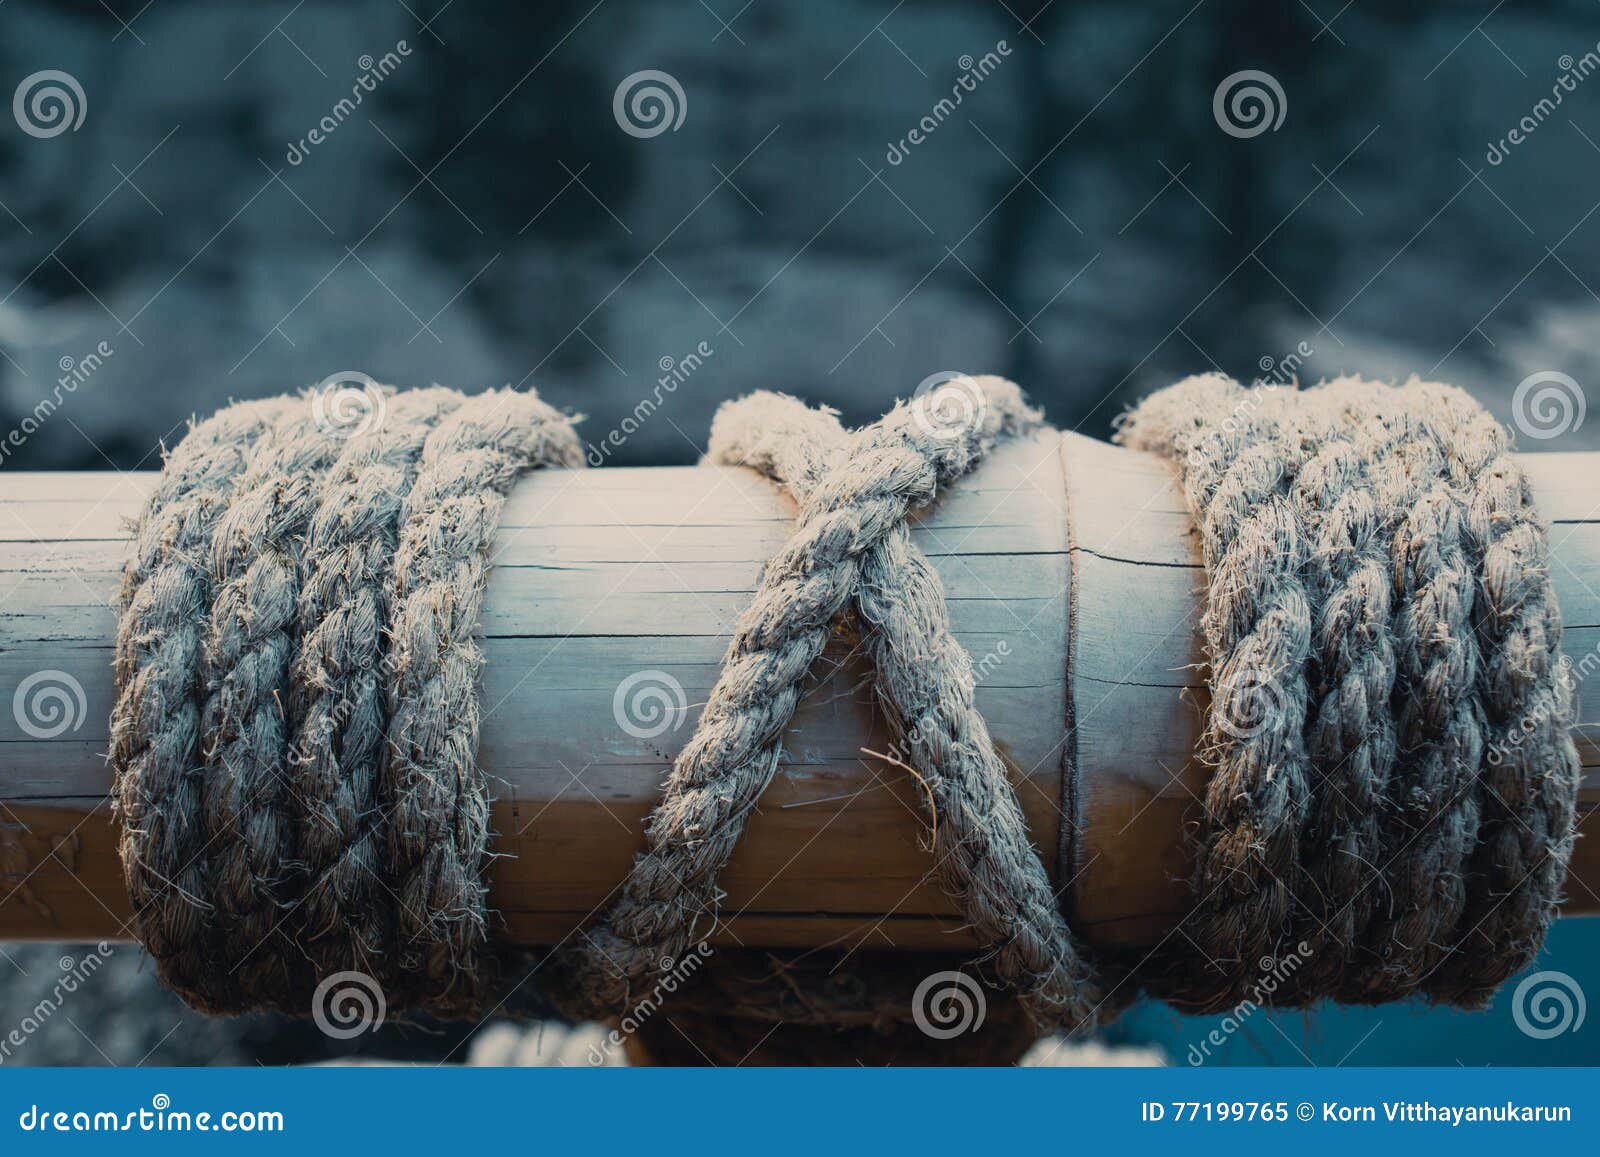 Japan Style Bamboo Rope Tire. Stock Image - Image of technic, rope: 77199765